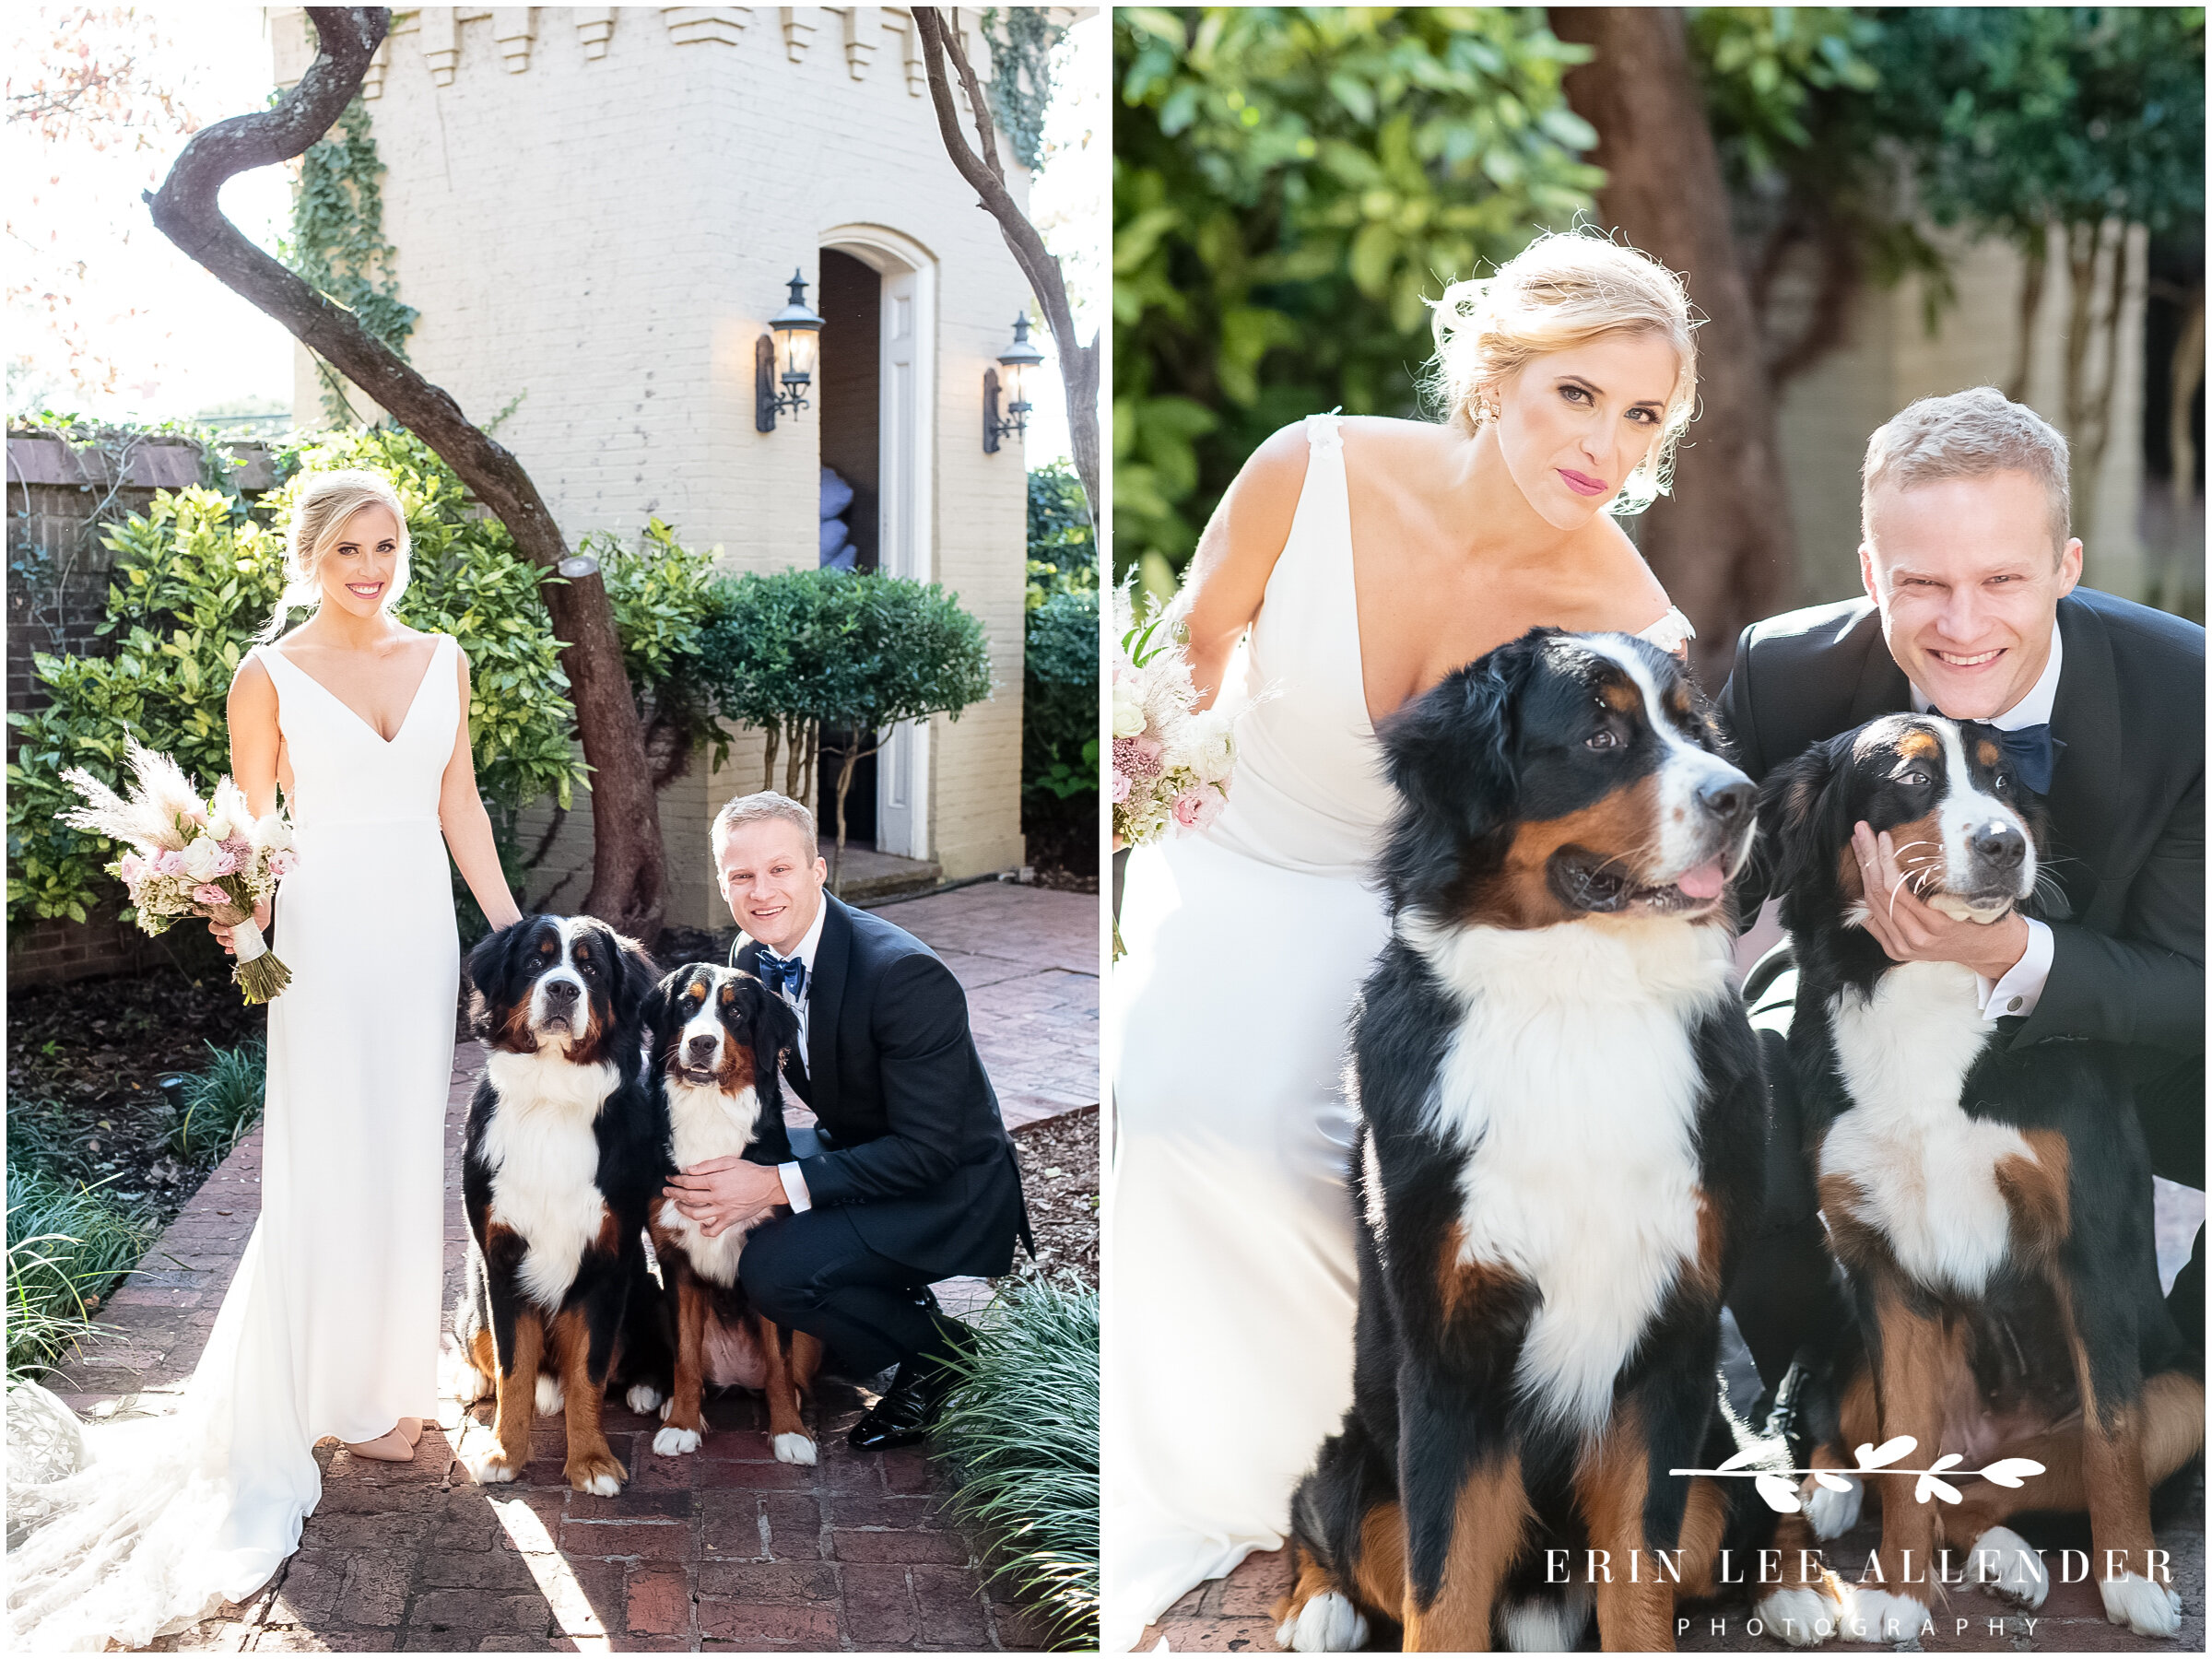 Bride-Groom-With-Dogs